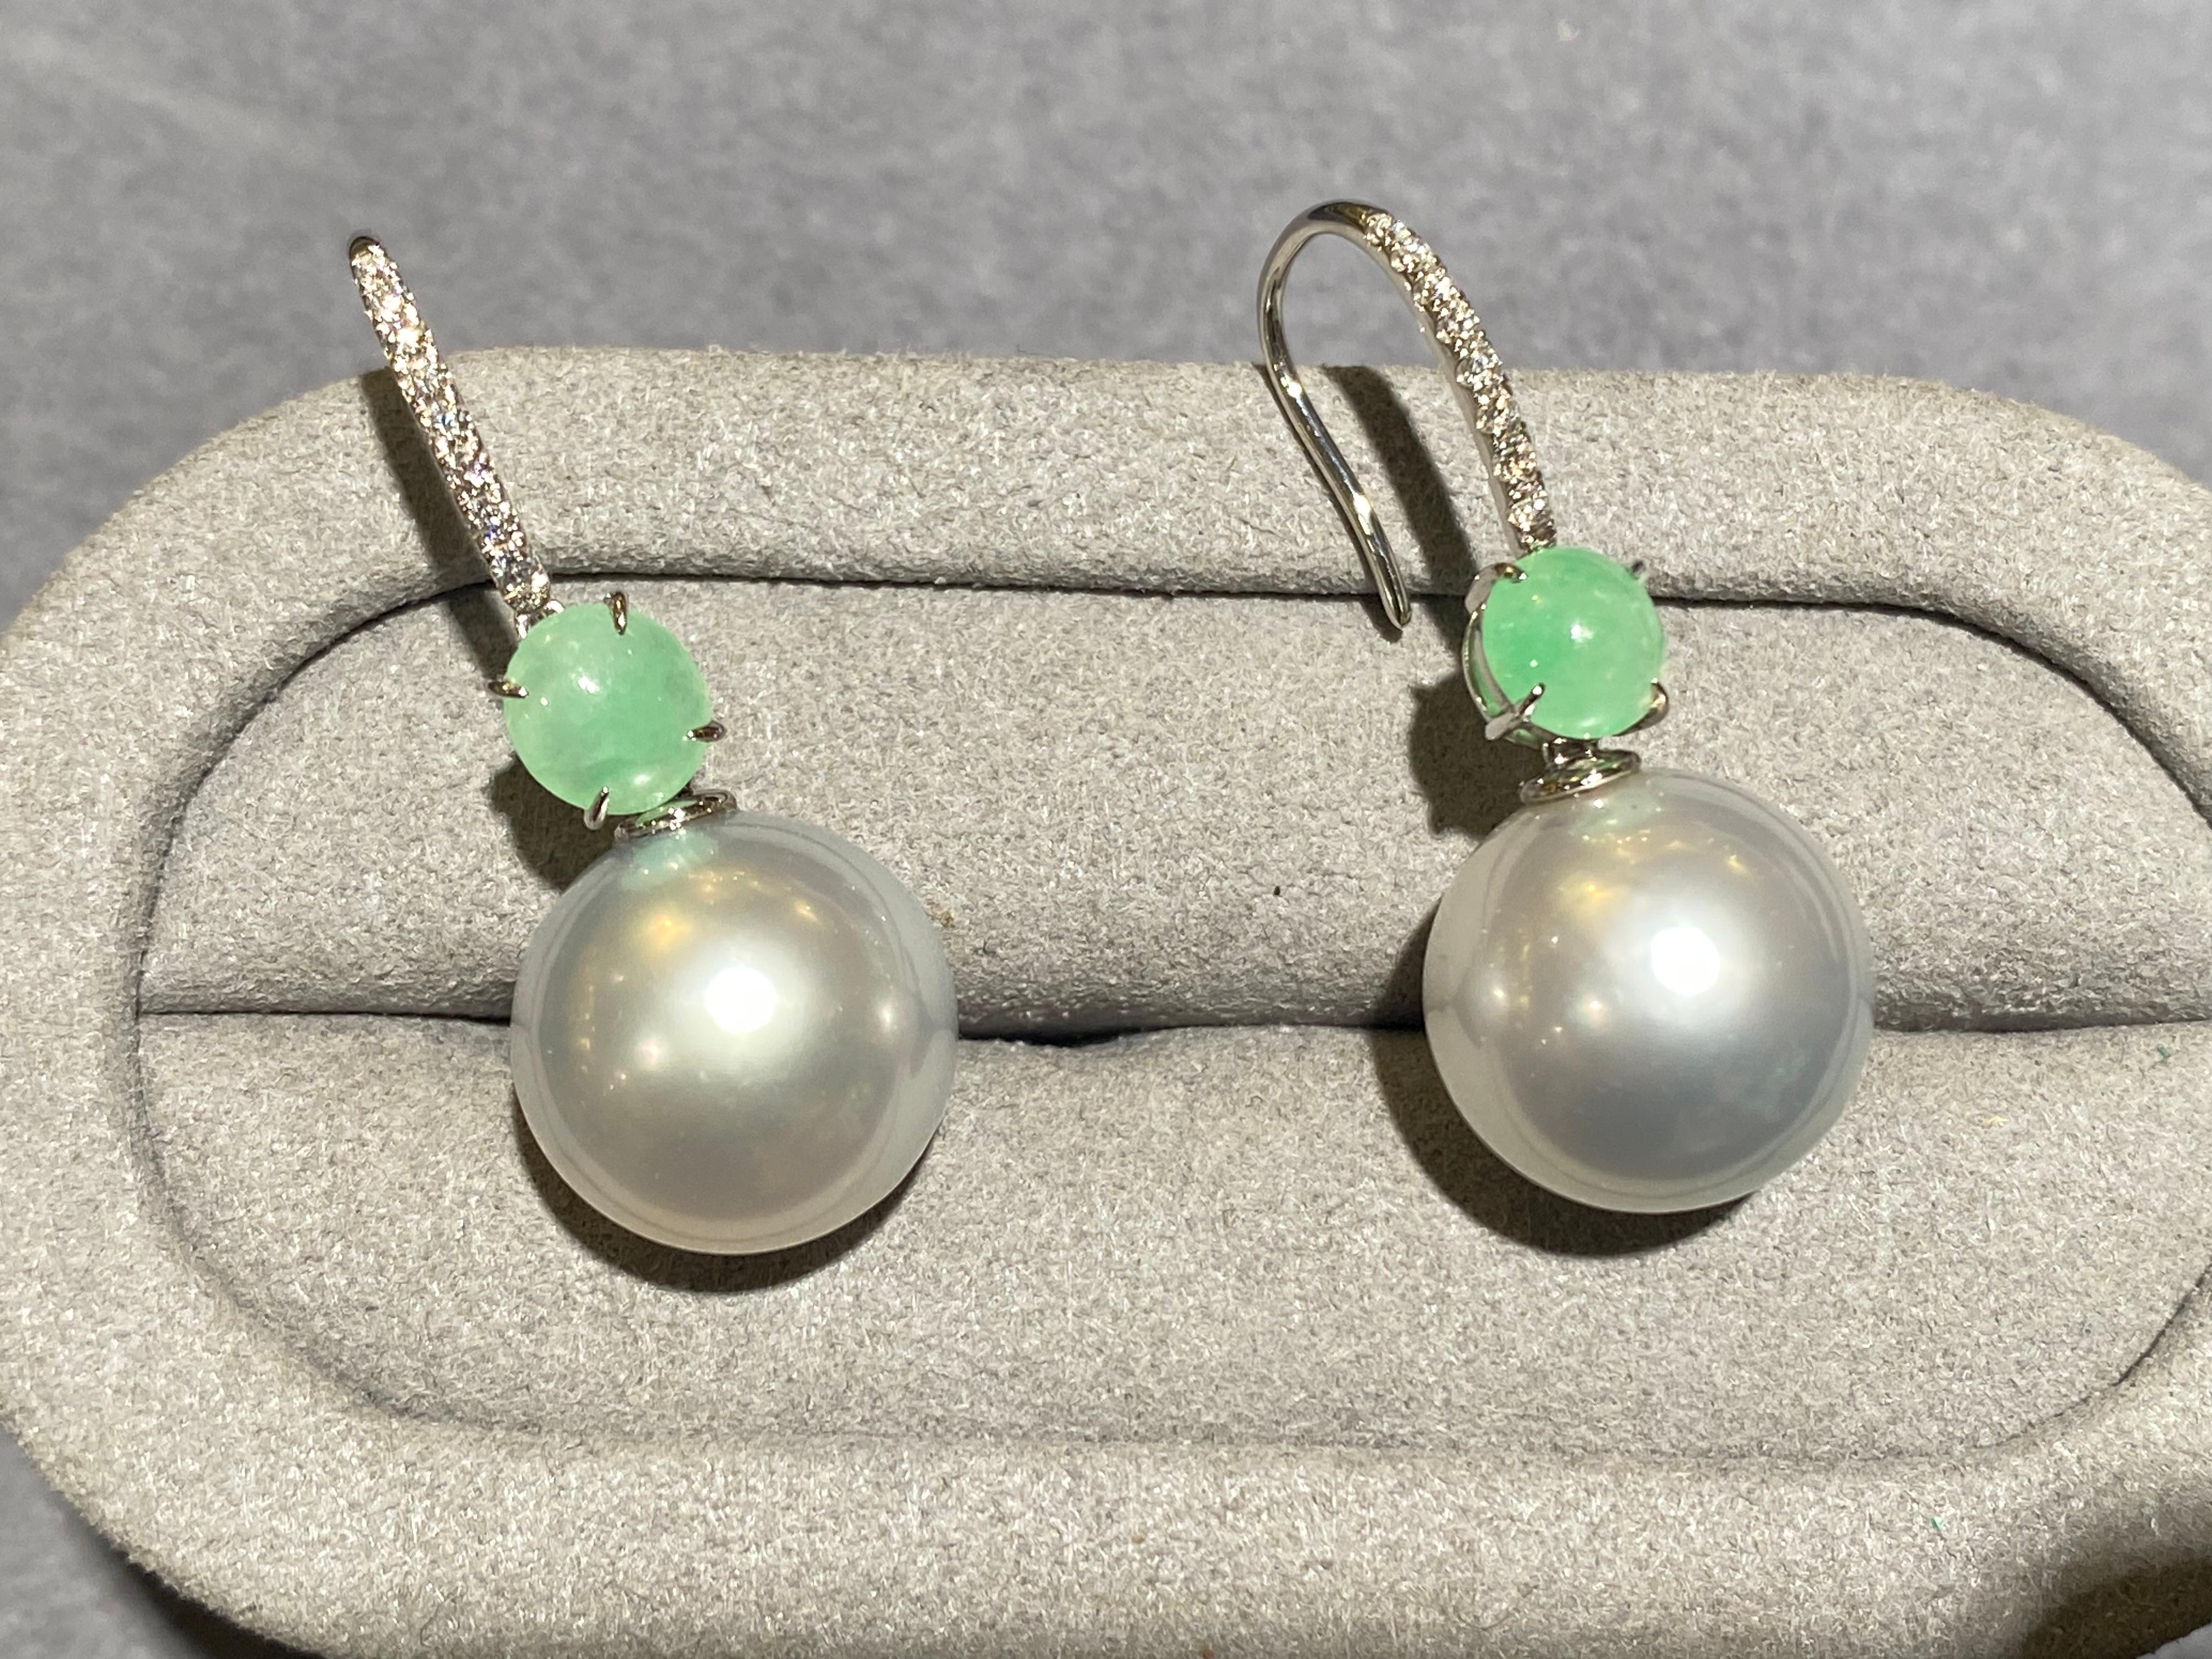 A pair of Type A green jadeite, white Australian south sea pearl and diamond earrings in 18k white gold. It is a simple dangle/drop earrings with the south sea pearls at the bottom and the jadeite cabochon connecting the south sea pearl and the